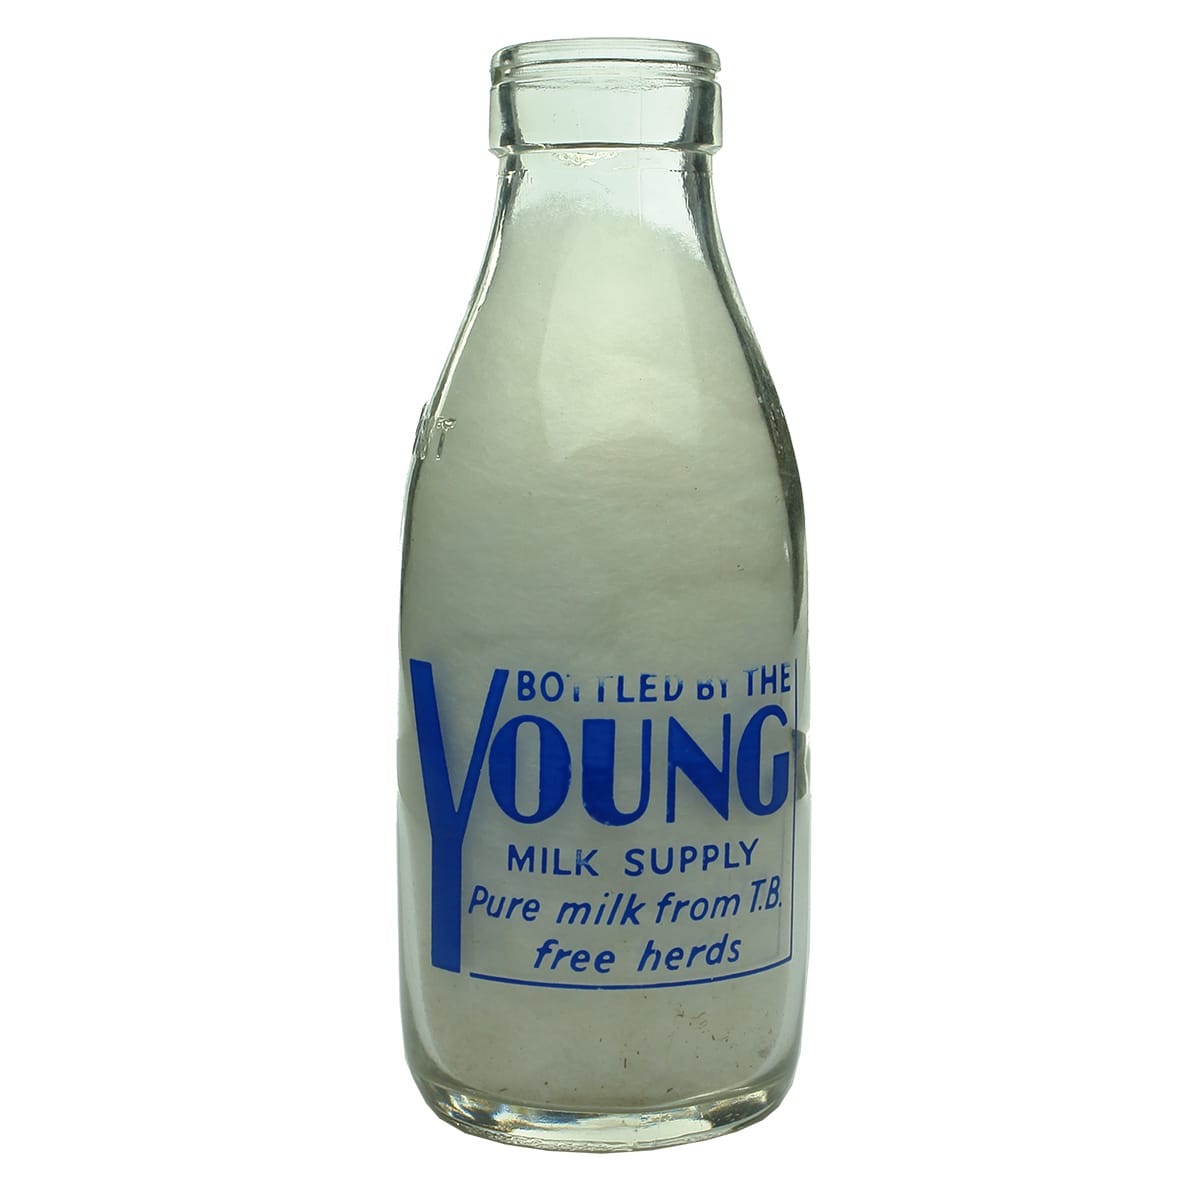 Milk. Young Milk Supply. Blue print. 1 Pint. (New South Wales)